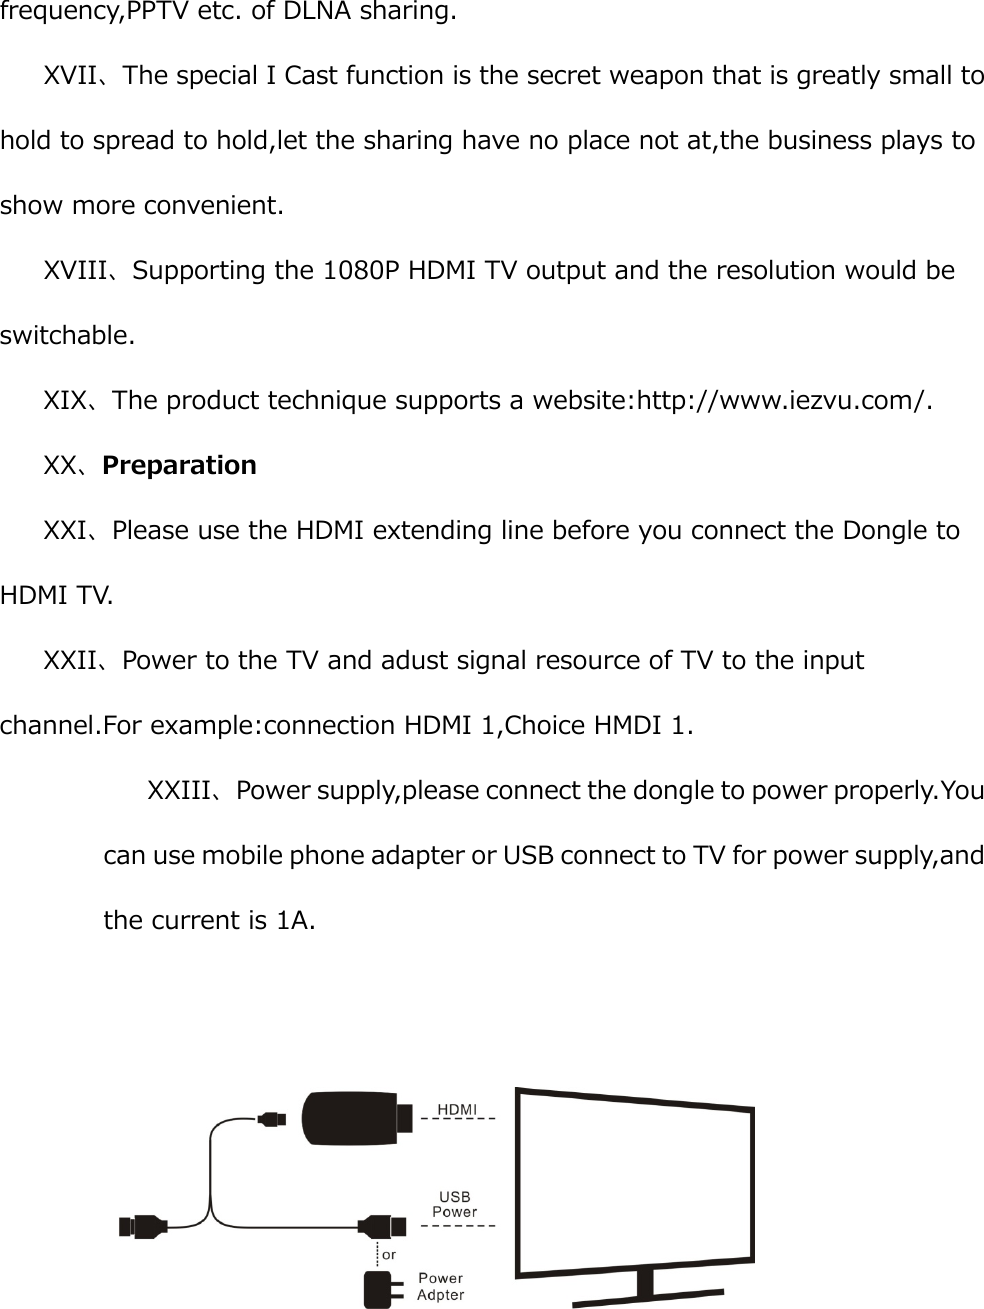 frequency,PPTV etc. of DLNA sharing. XVII、The special I Cast function is the secret weapon that is greatly small to hold to spread to hold,let the sharing have no place not at,the business plays to show more convenient. XVIII、Supporting the 1080P HDMI TV output and the resolution would be switchable. XIX、The product technique supports a website:http://www.iezvu.com/. XX、Preparation XXI、Please use the HDMI extending line before you connect the Dongle to HDMI TV. XXII、Power to the TV and adust signal resource of TV to the input channel.For example:connection HDMI 1,Choice HMDI 1. XXIII、Power supply,please connect the dongle to power properly.You can use mobile phone adapter or USB connect to TV for power supply,and the current is 1A.   